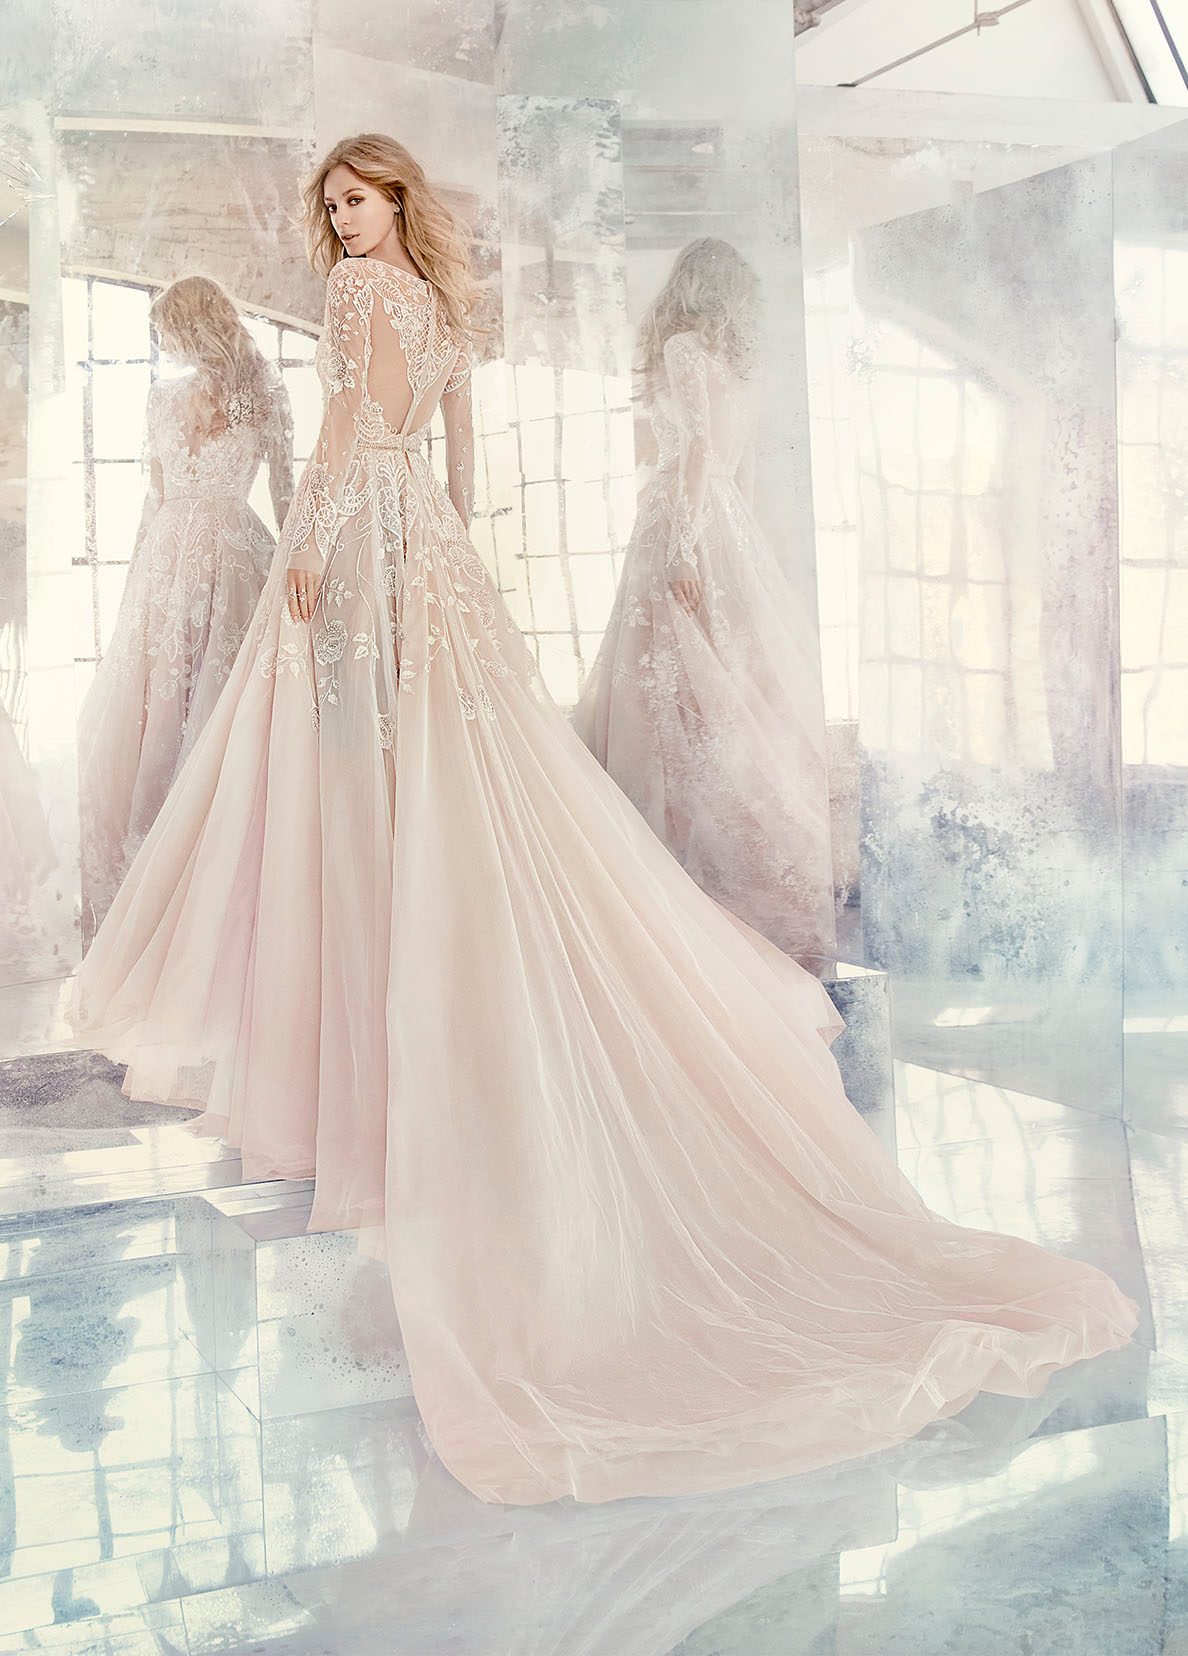 The Hayley gown by Hayley Paige. Image: Eternal Bridal